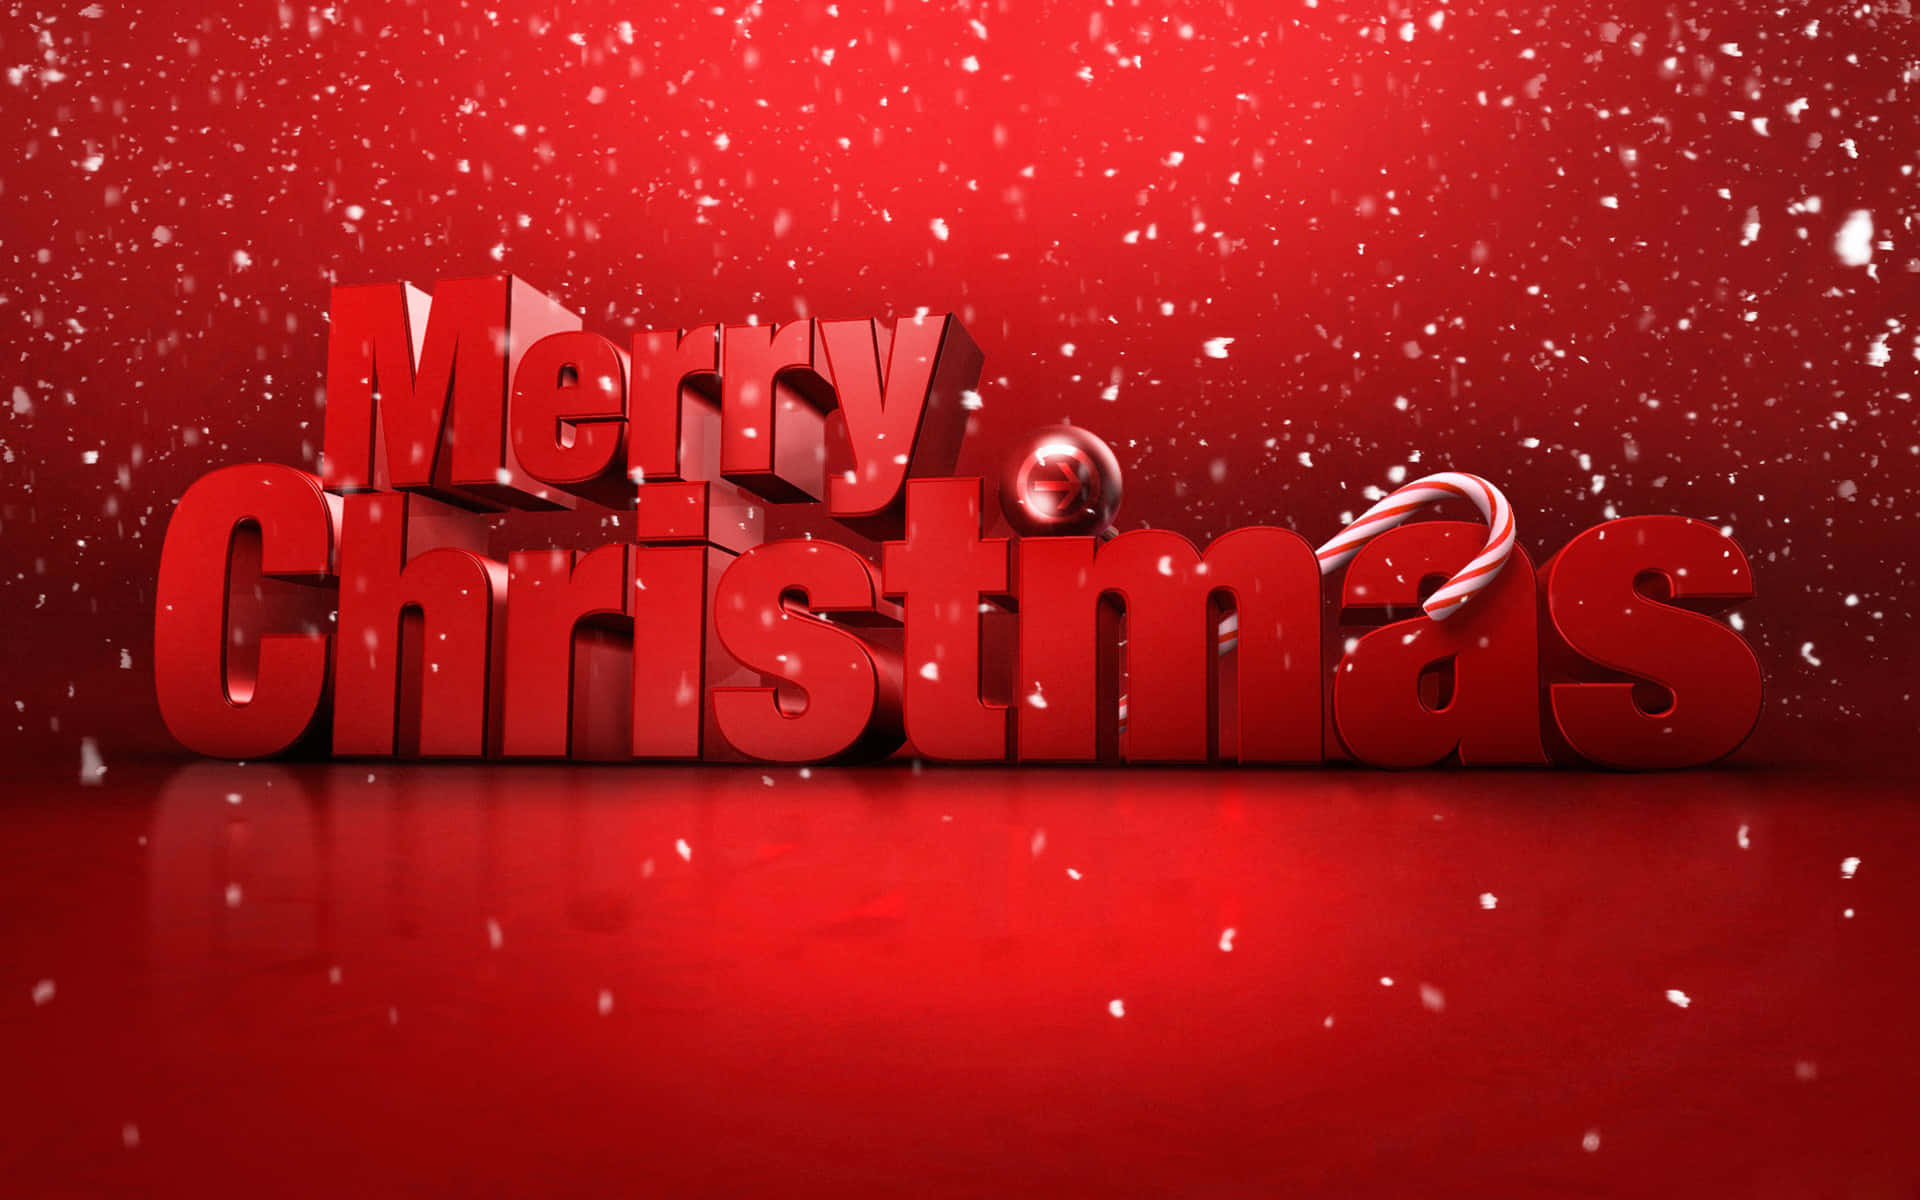 Celebrate the Christmas season with this festive high resolution background.